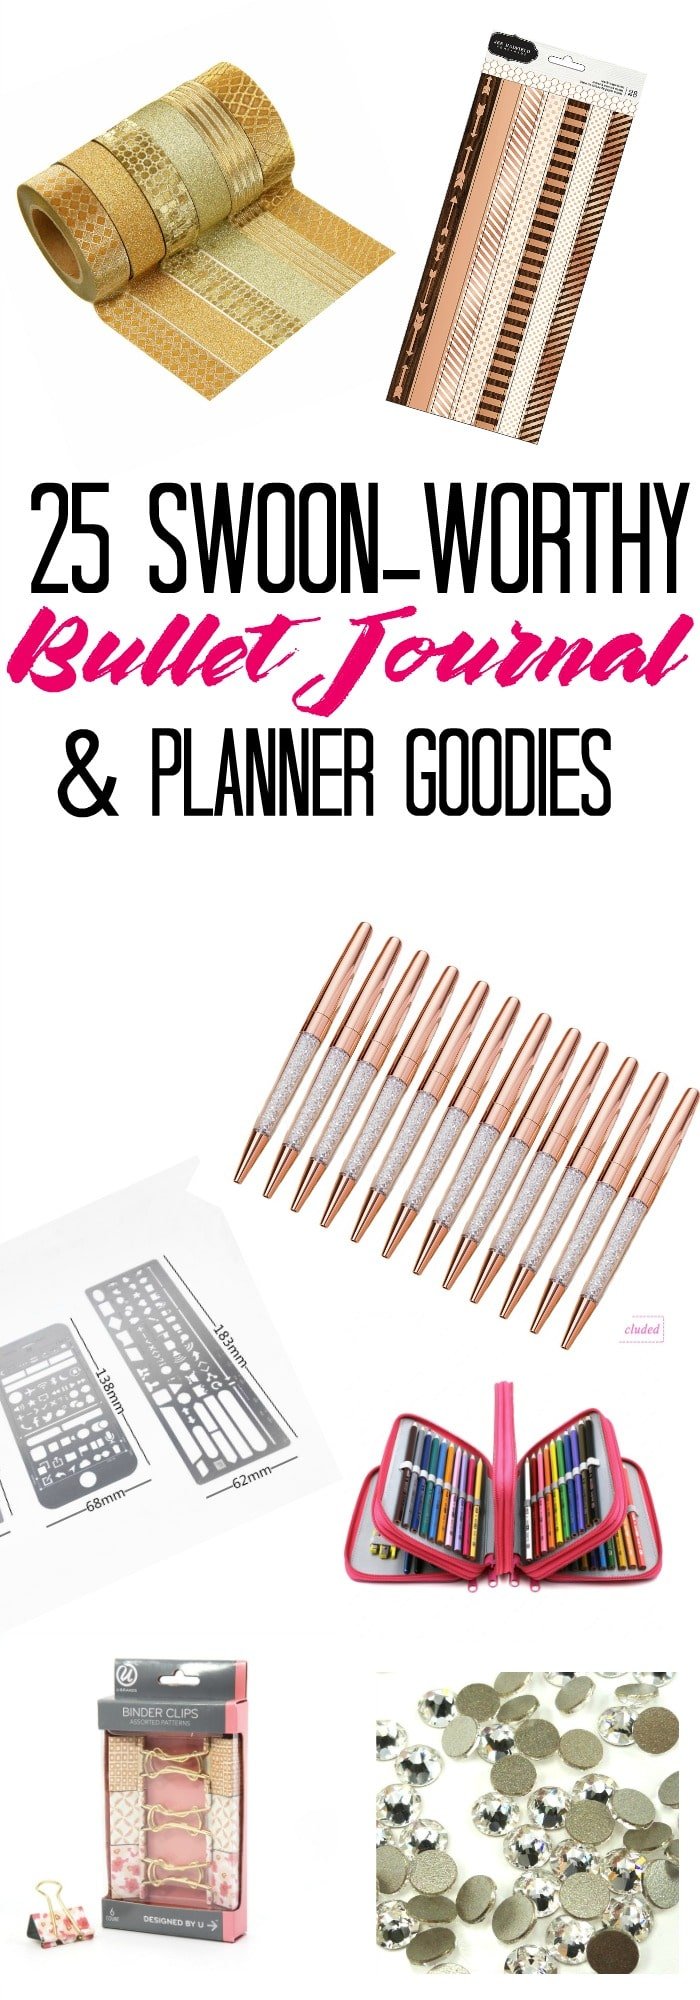 25 Swoon-Worthy Bullet Journal Goodies. Rose gold office supplies, stamps, metallic washi tape, and so much more! You will want to blow your life savings on crafty art and office accessories for your bujo after reading this post.